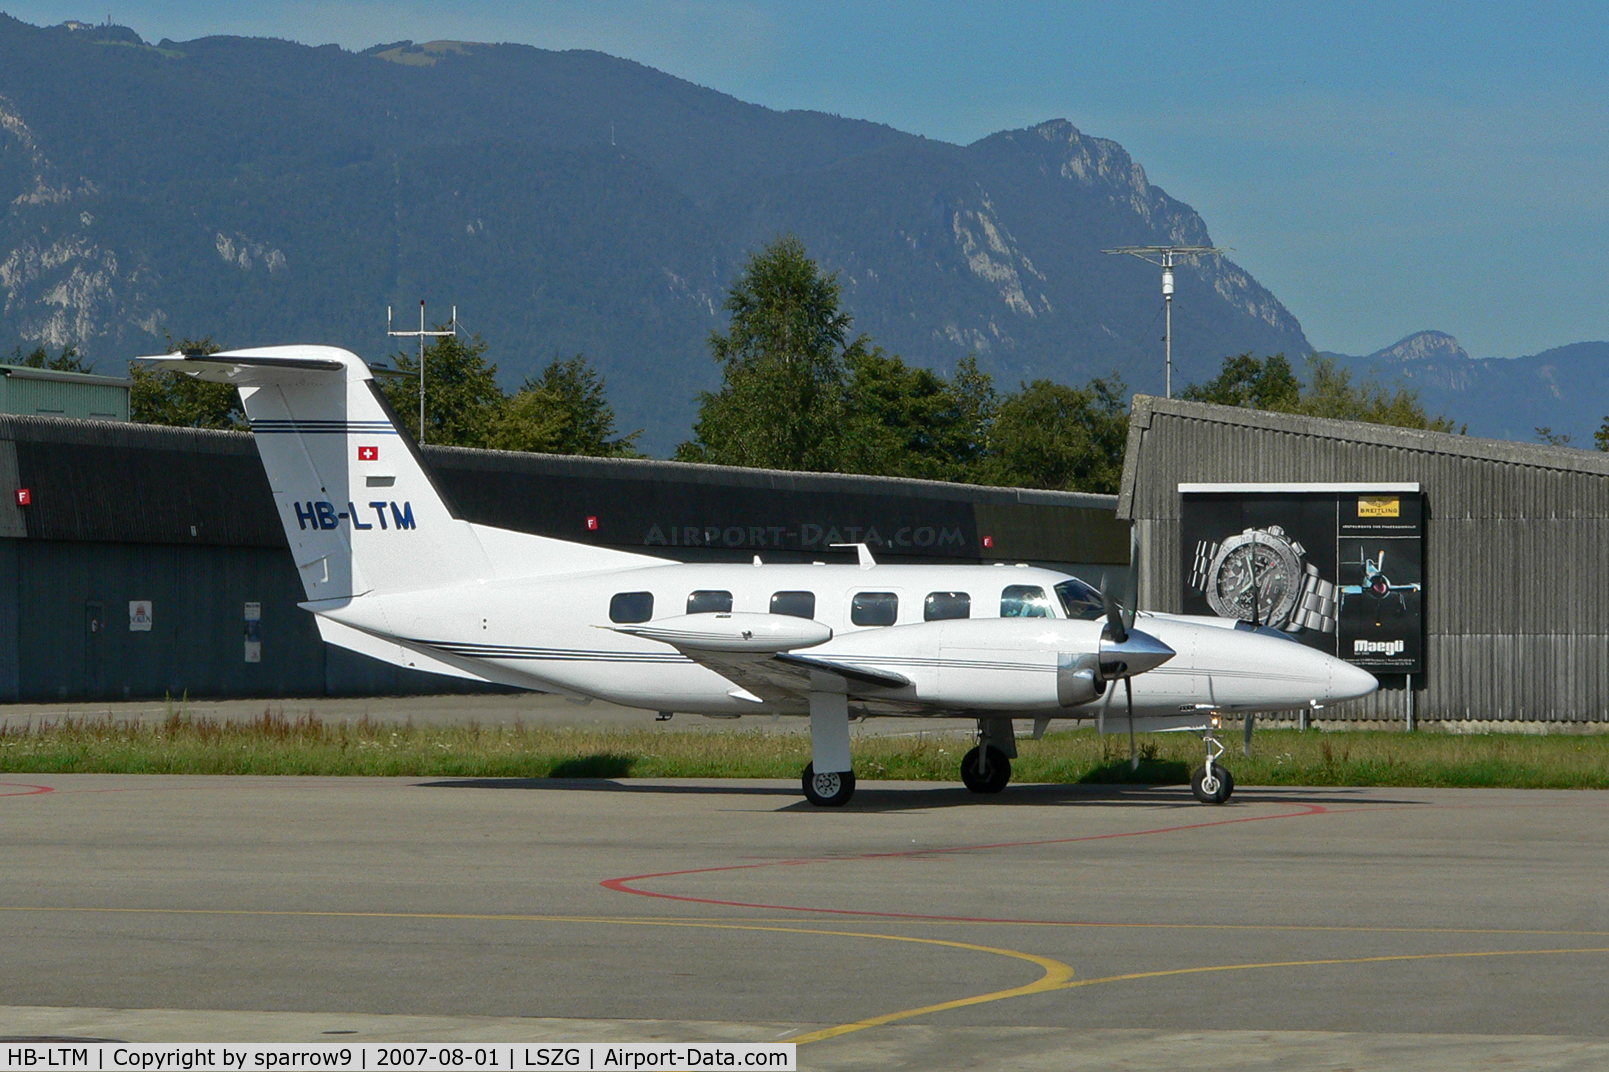 HB-LTM, 1985 Piper PA-42-1000 Cheyenne 400LS C/N 42-5527028, Taxiing at Grenchen. HB-registered from 2002-07-02 until 2015-11-30